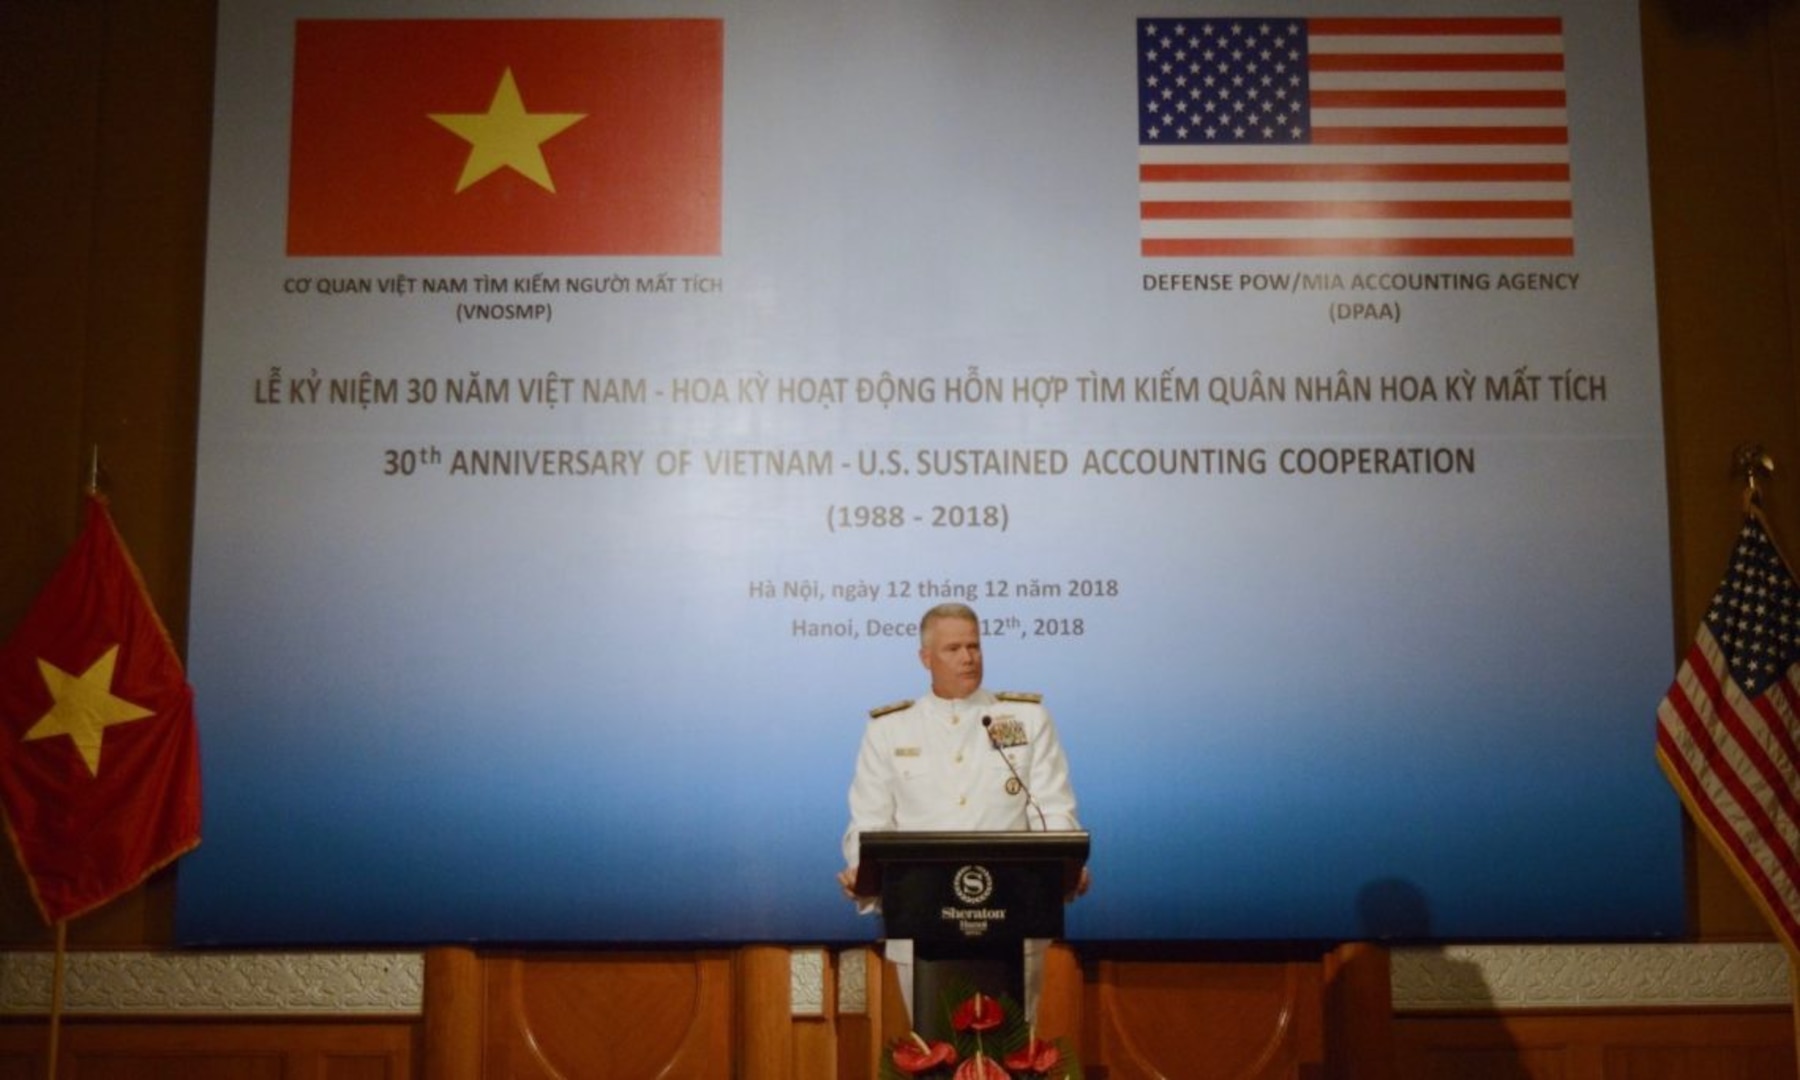 The U.S. and Vietnam Celebrate 30th Anniversary of Sustained Operations to Account for Americans Missing from War